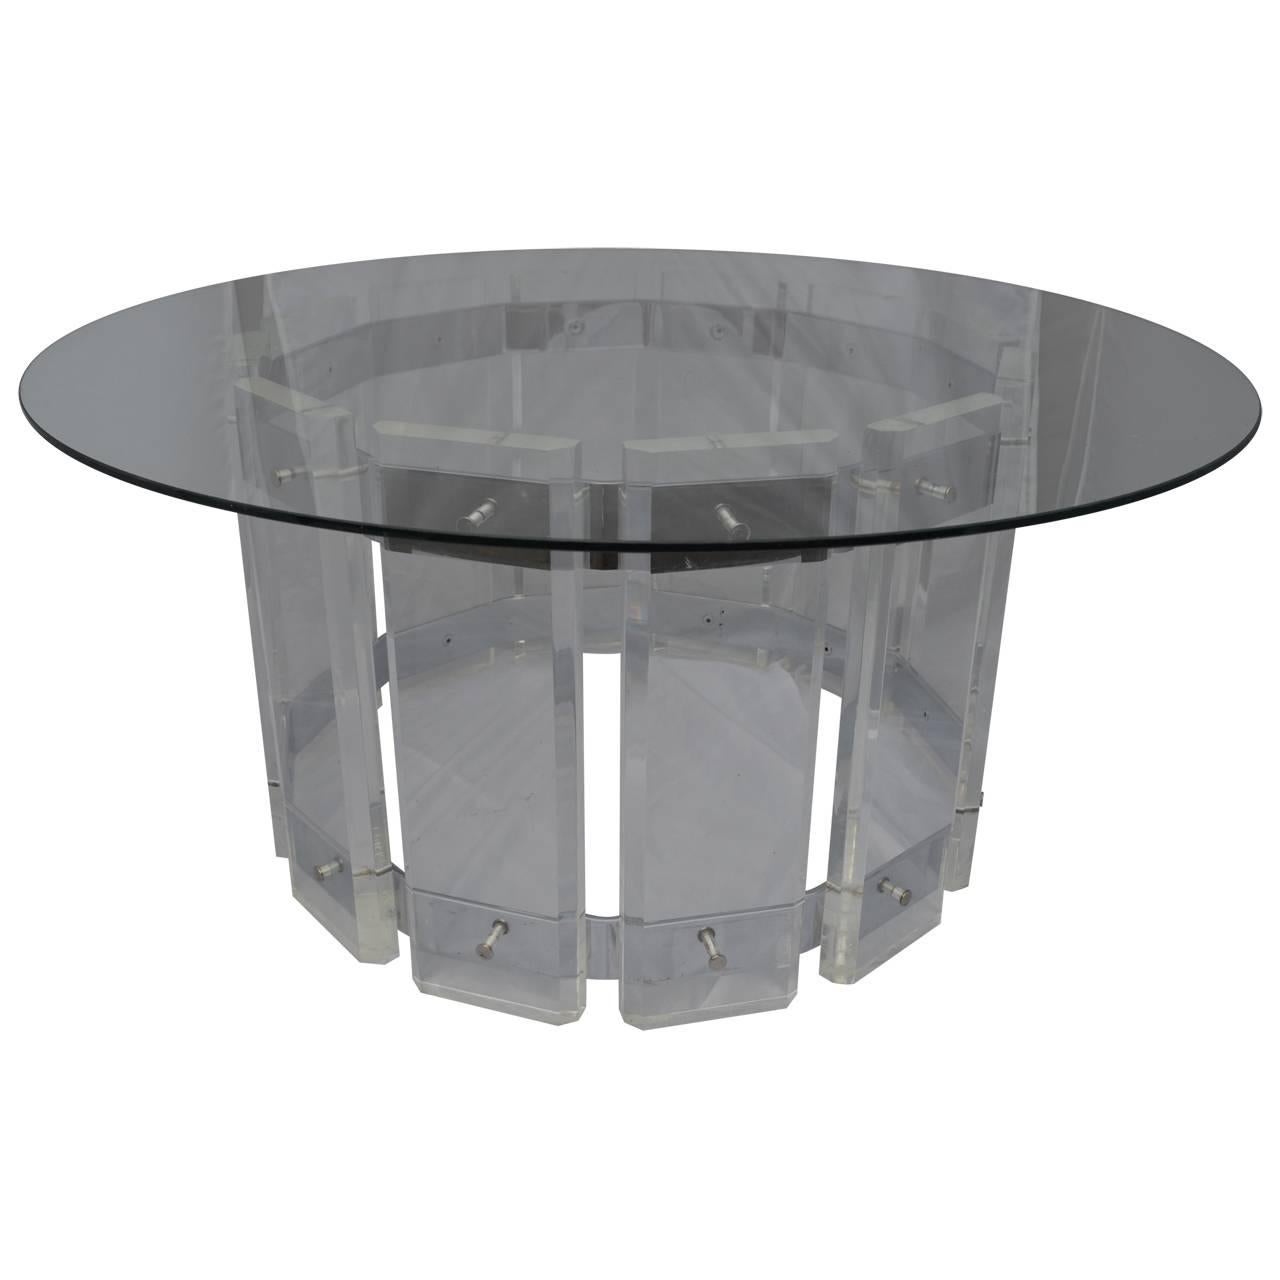 American Mid-Century Modern Round Lucite Glass Top Table For Sale